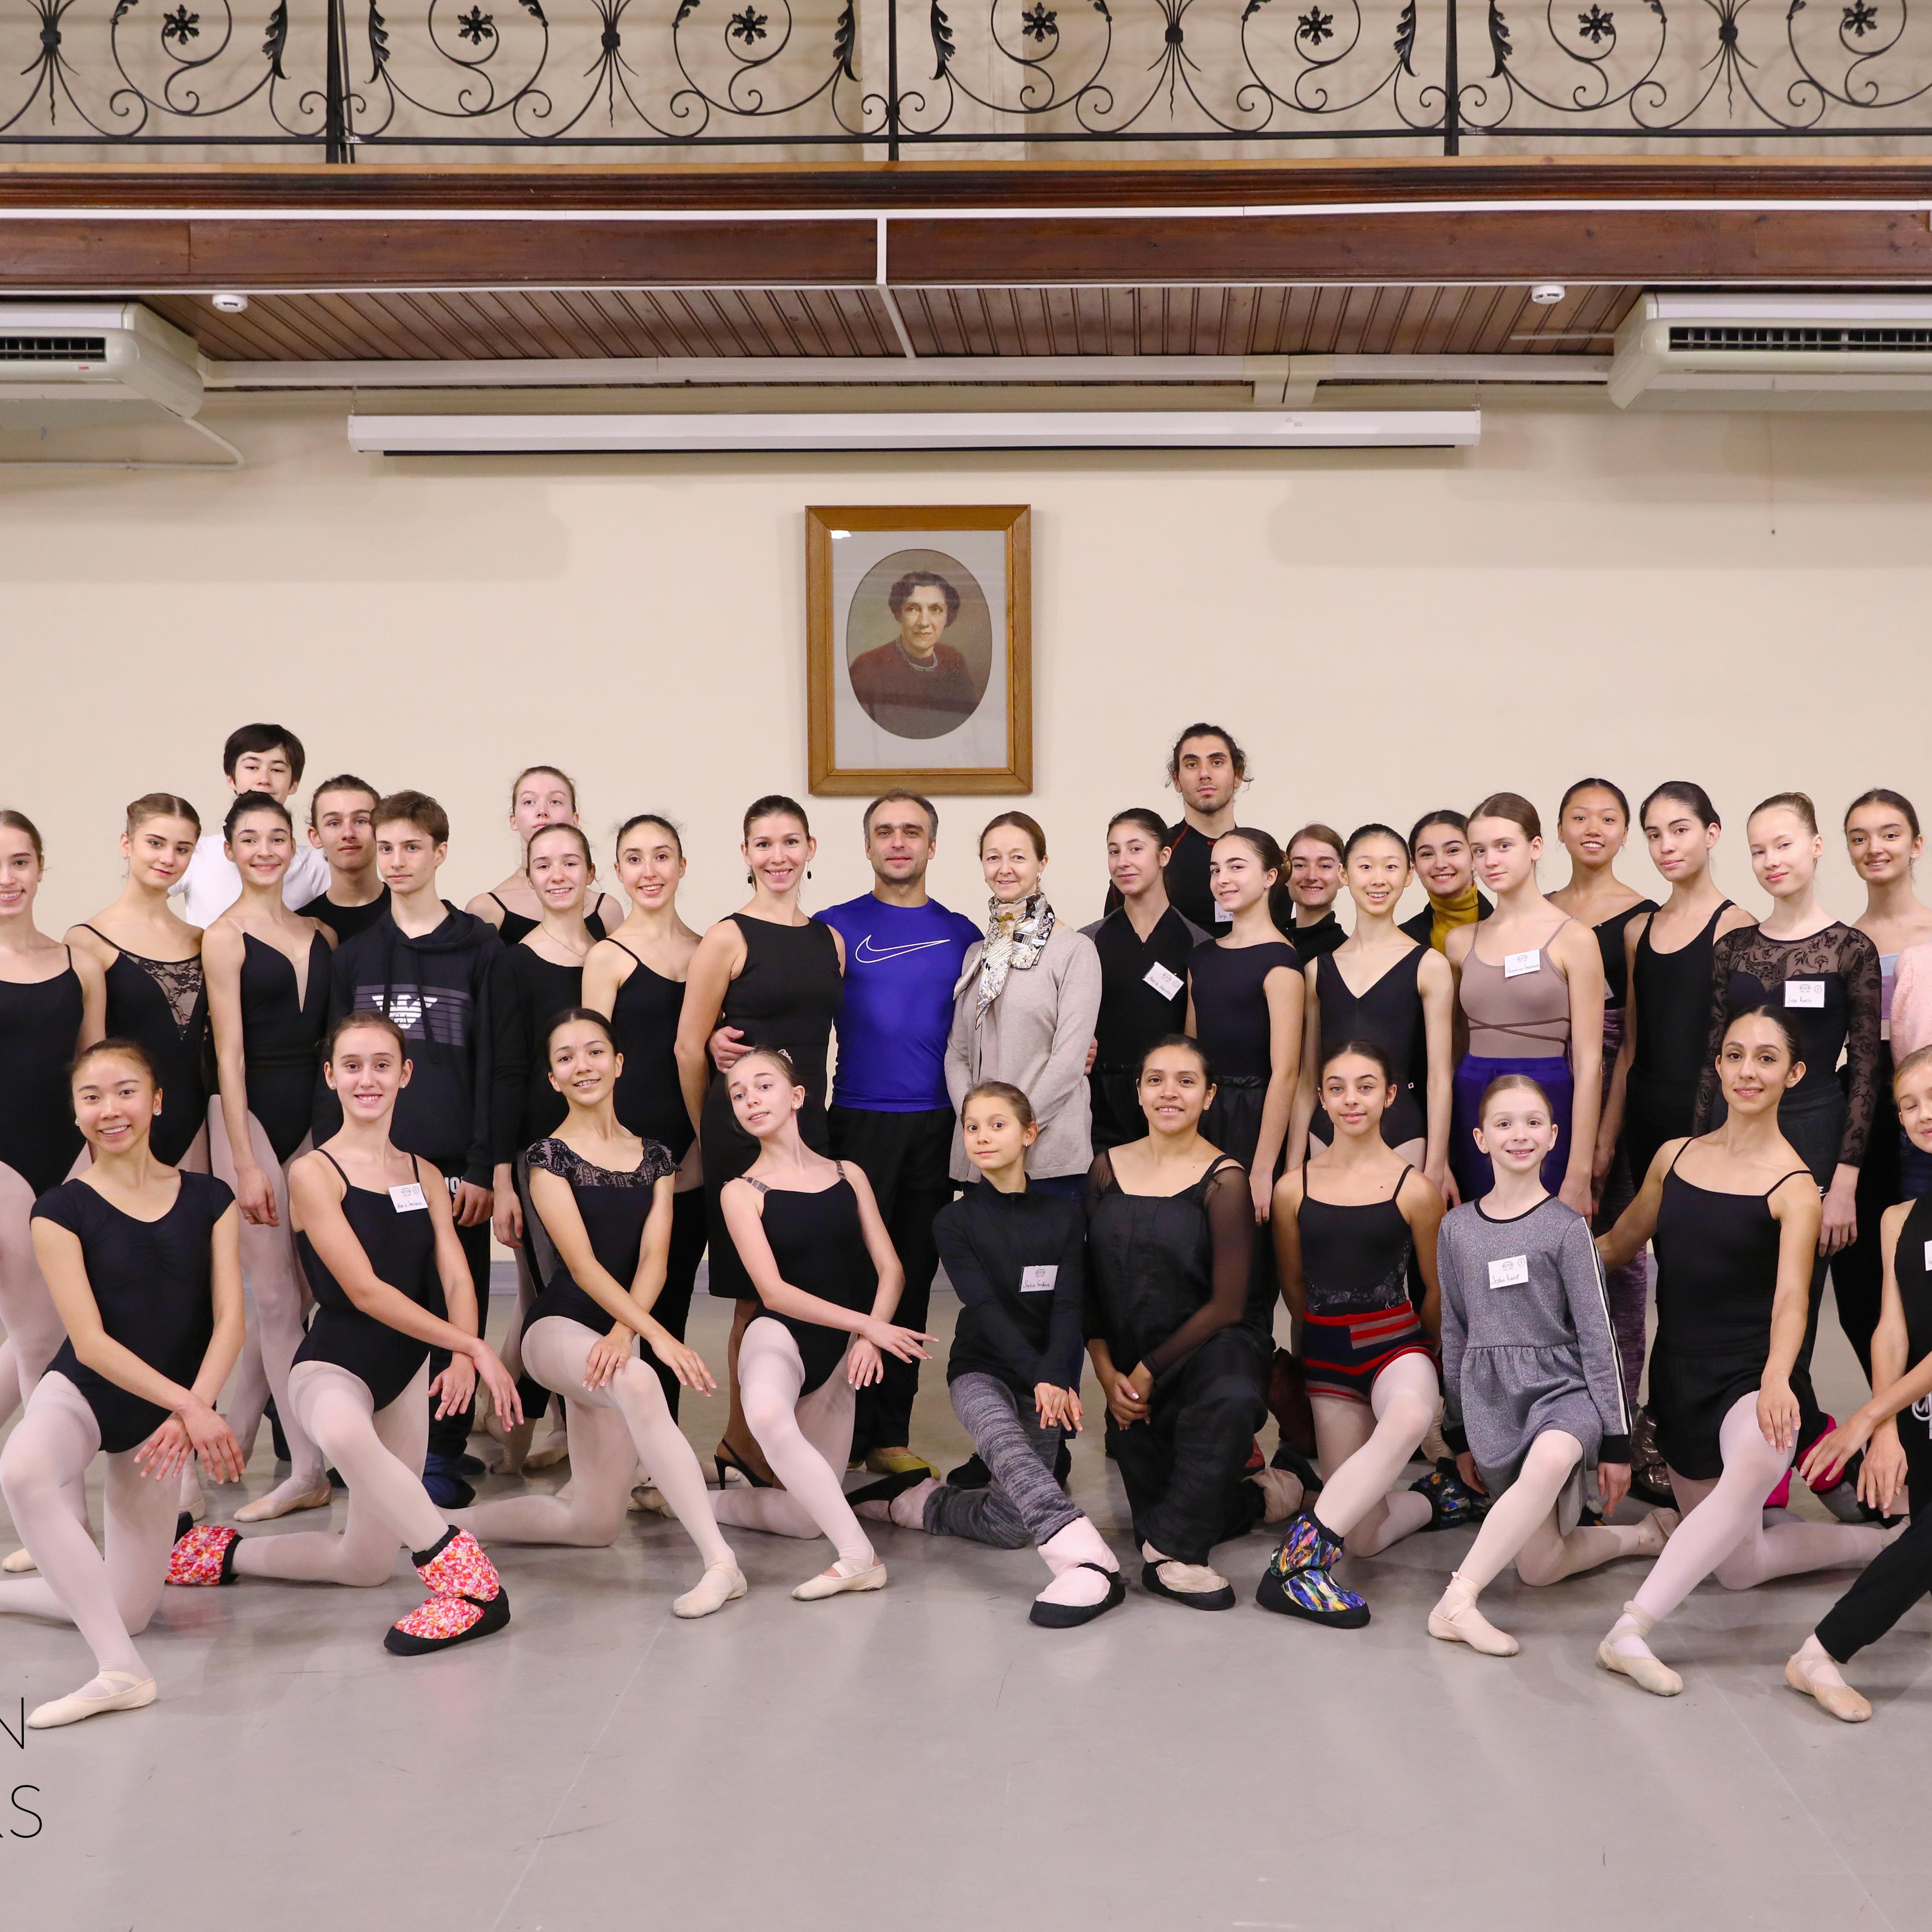 Meeting with ballet stars